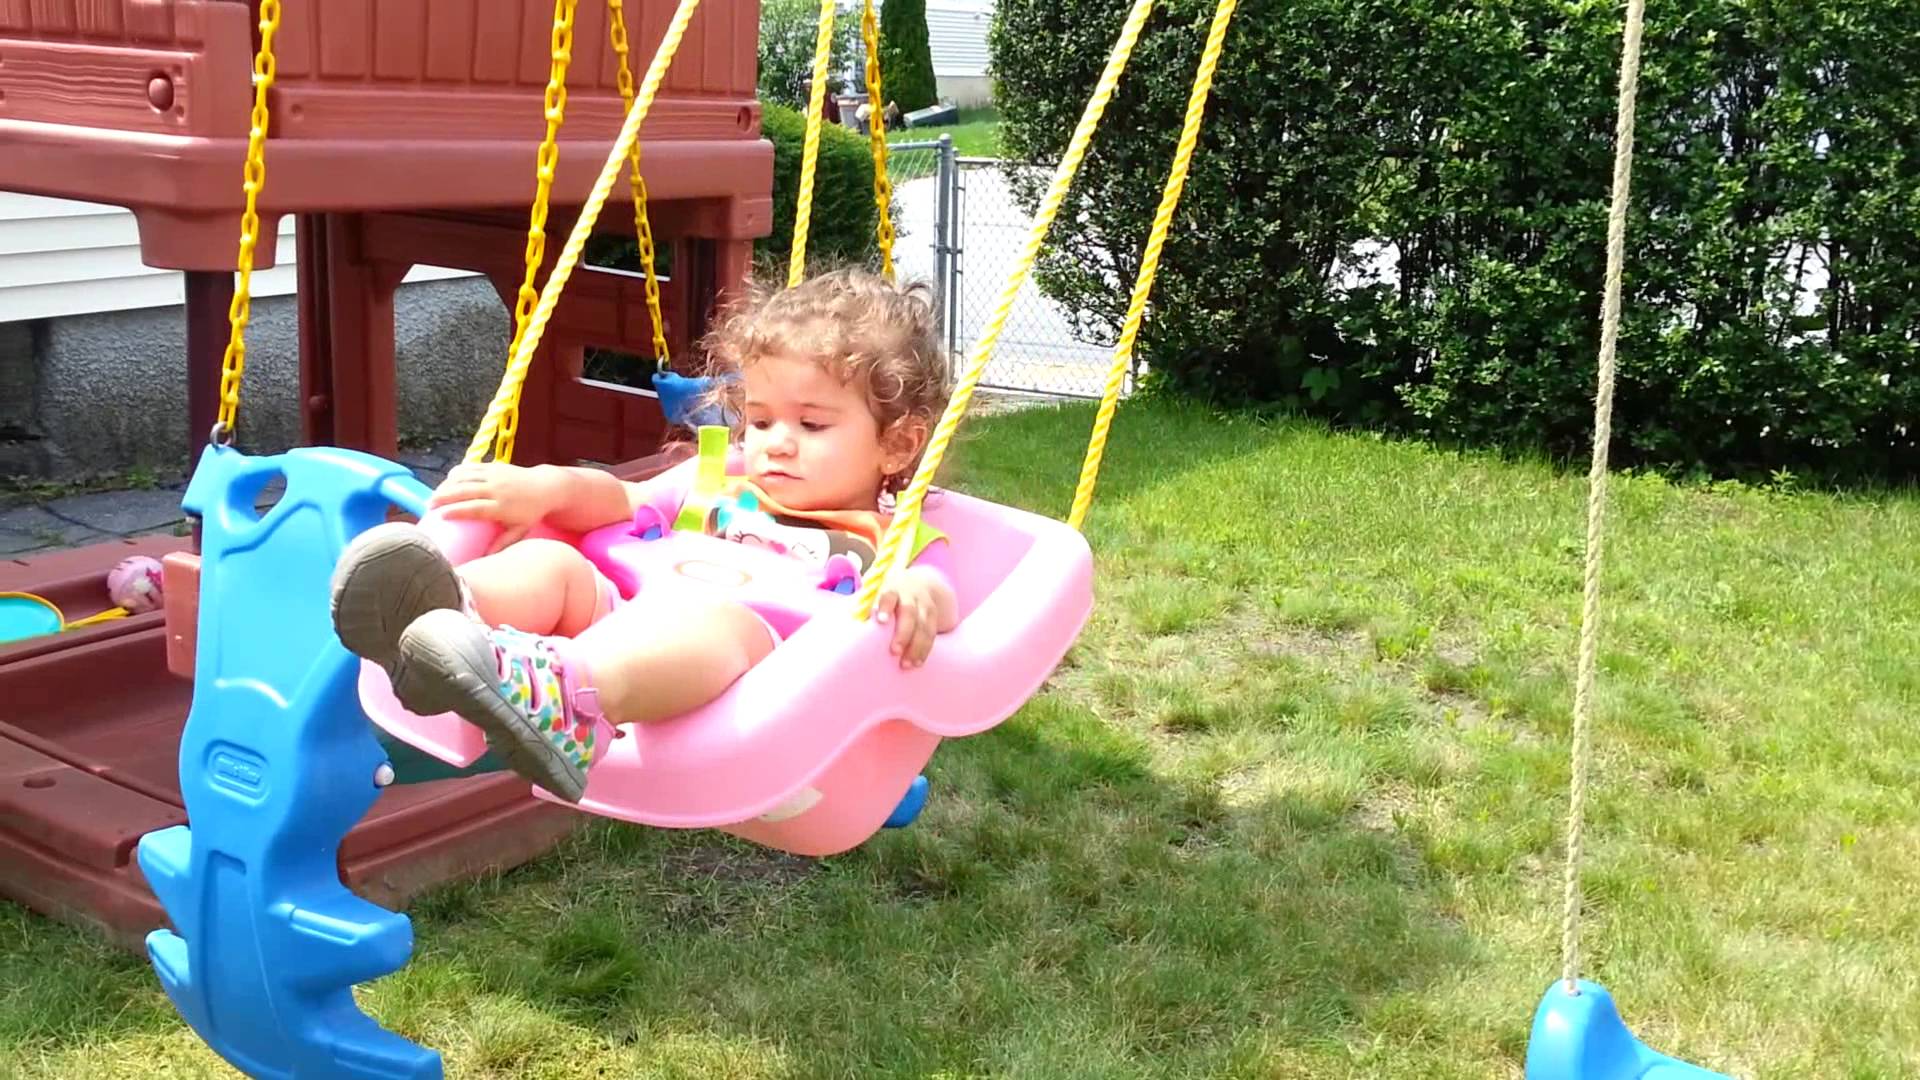 My baby playing with her Little Tykes Swing set! - YouTube